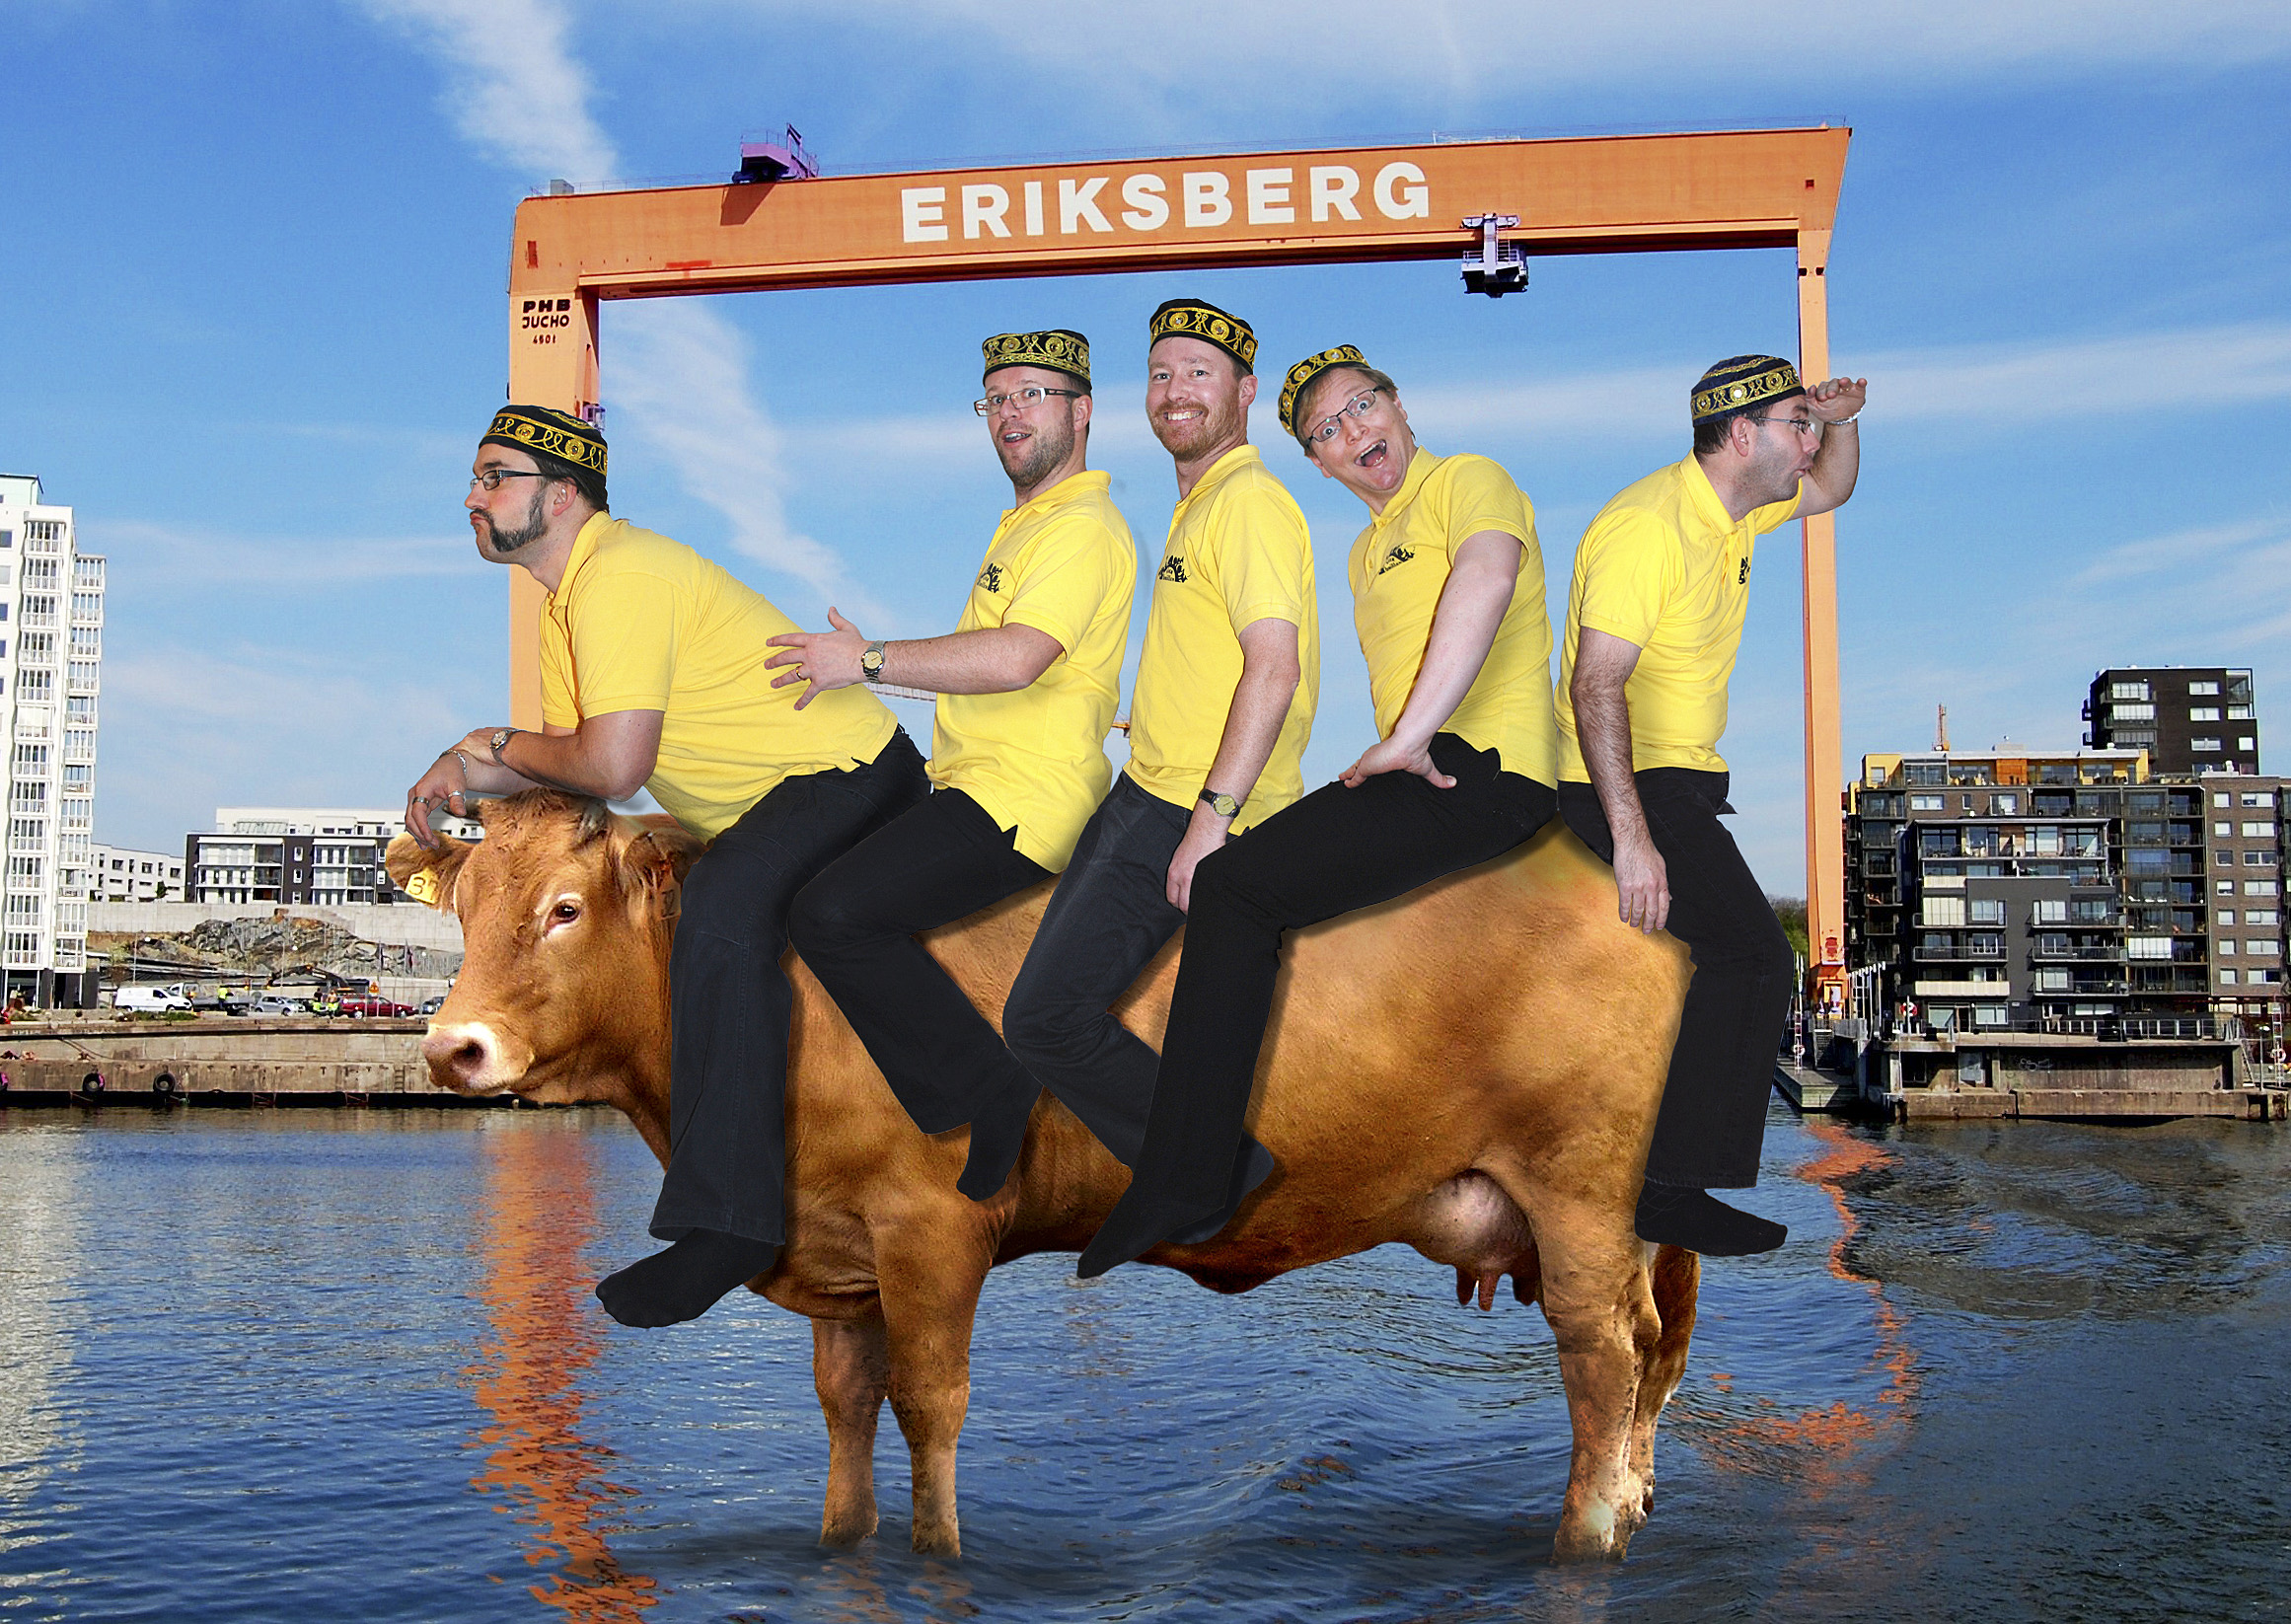 Five male coded people are sitting on a cow in front of the Eriksberg crane. They are wearing yellow polo shirts, black trousers and black kufi hats.